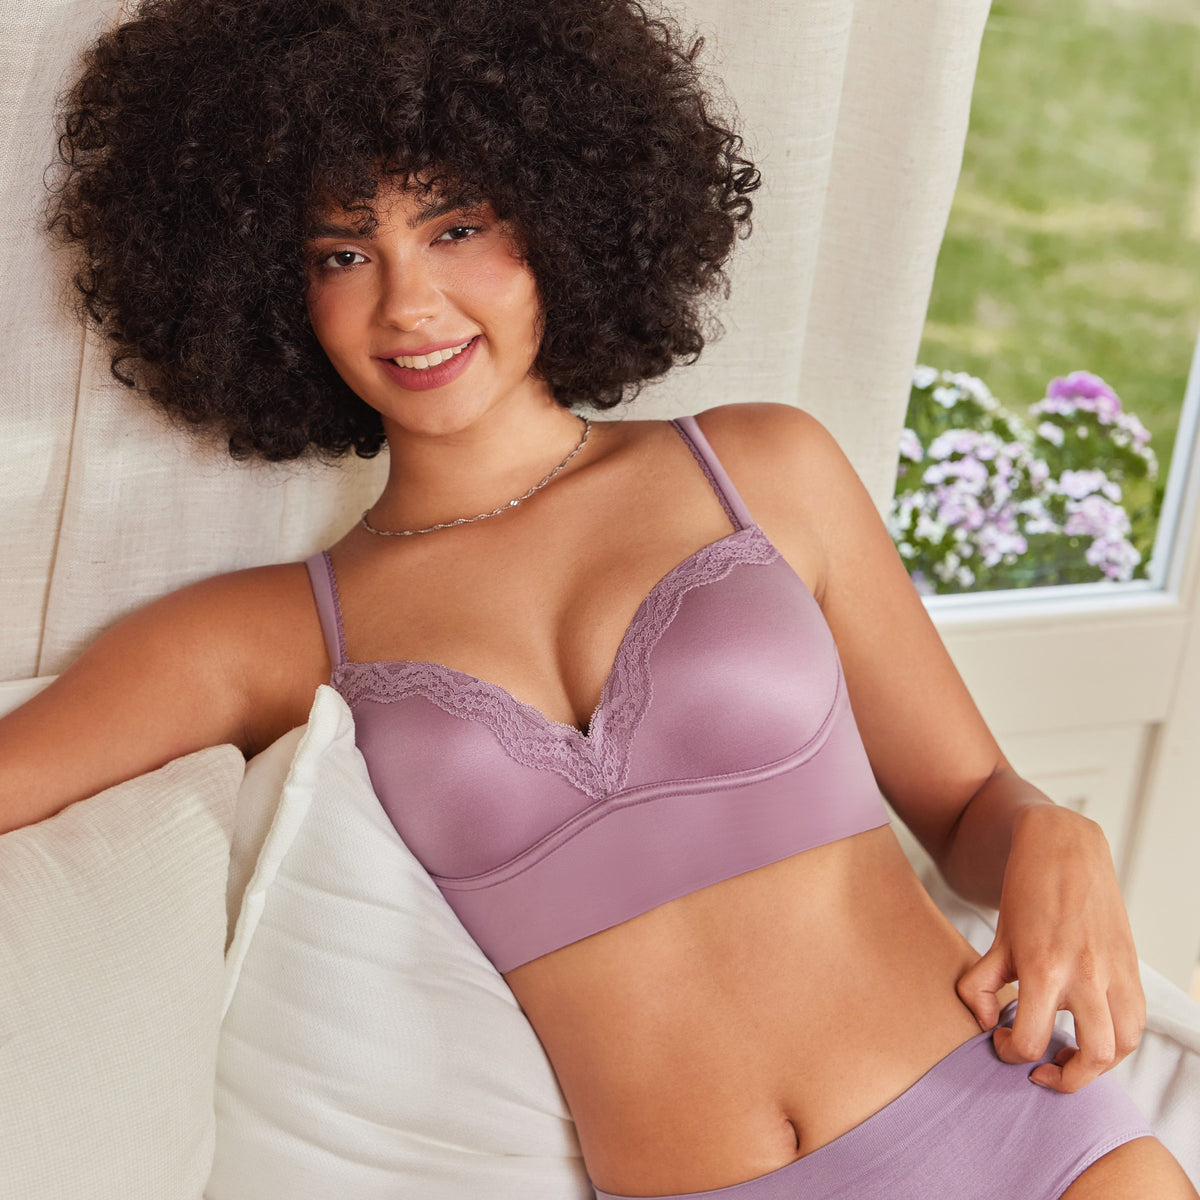 Meet your nee favorite Bra! Our brand new push up and shapewear bra wi